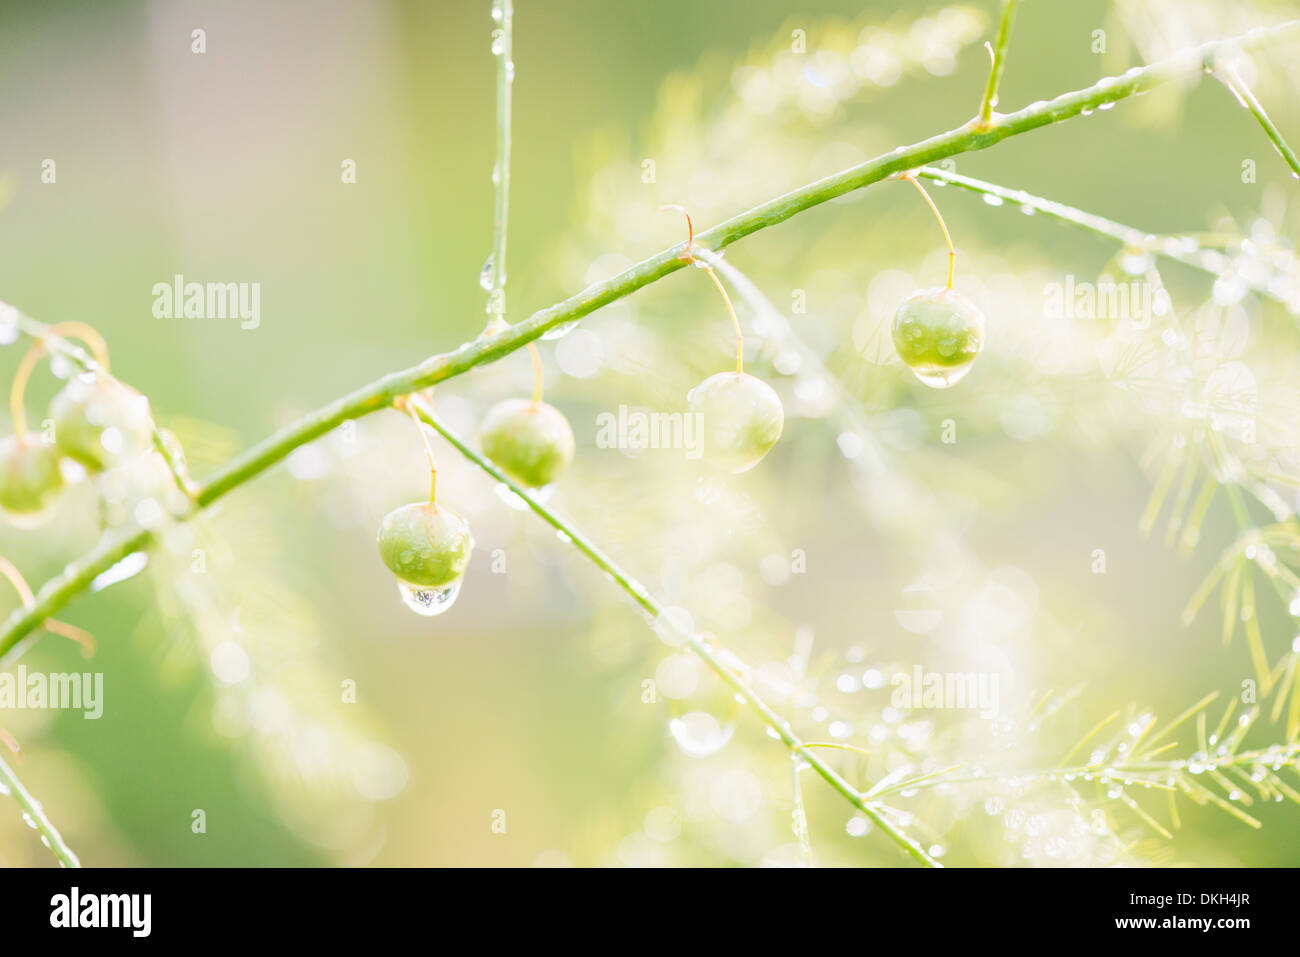 Close up of asparagus plant (Asparagus officinalis) covered in rain drops Stock Photo